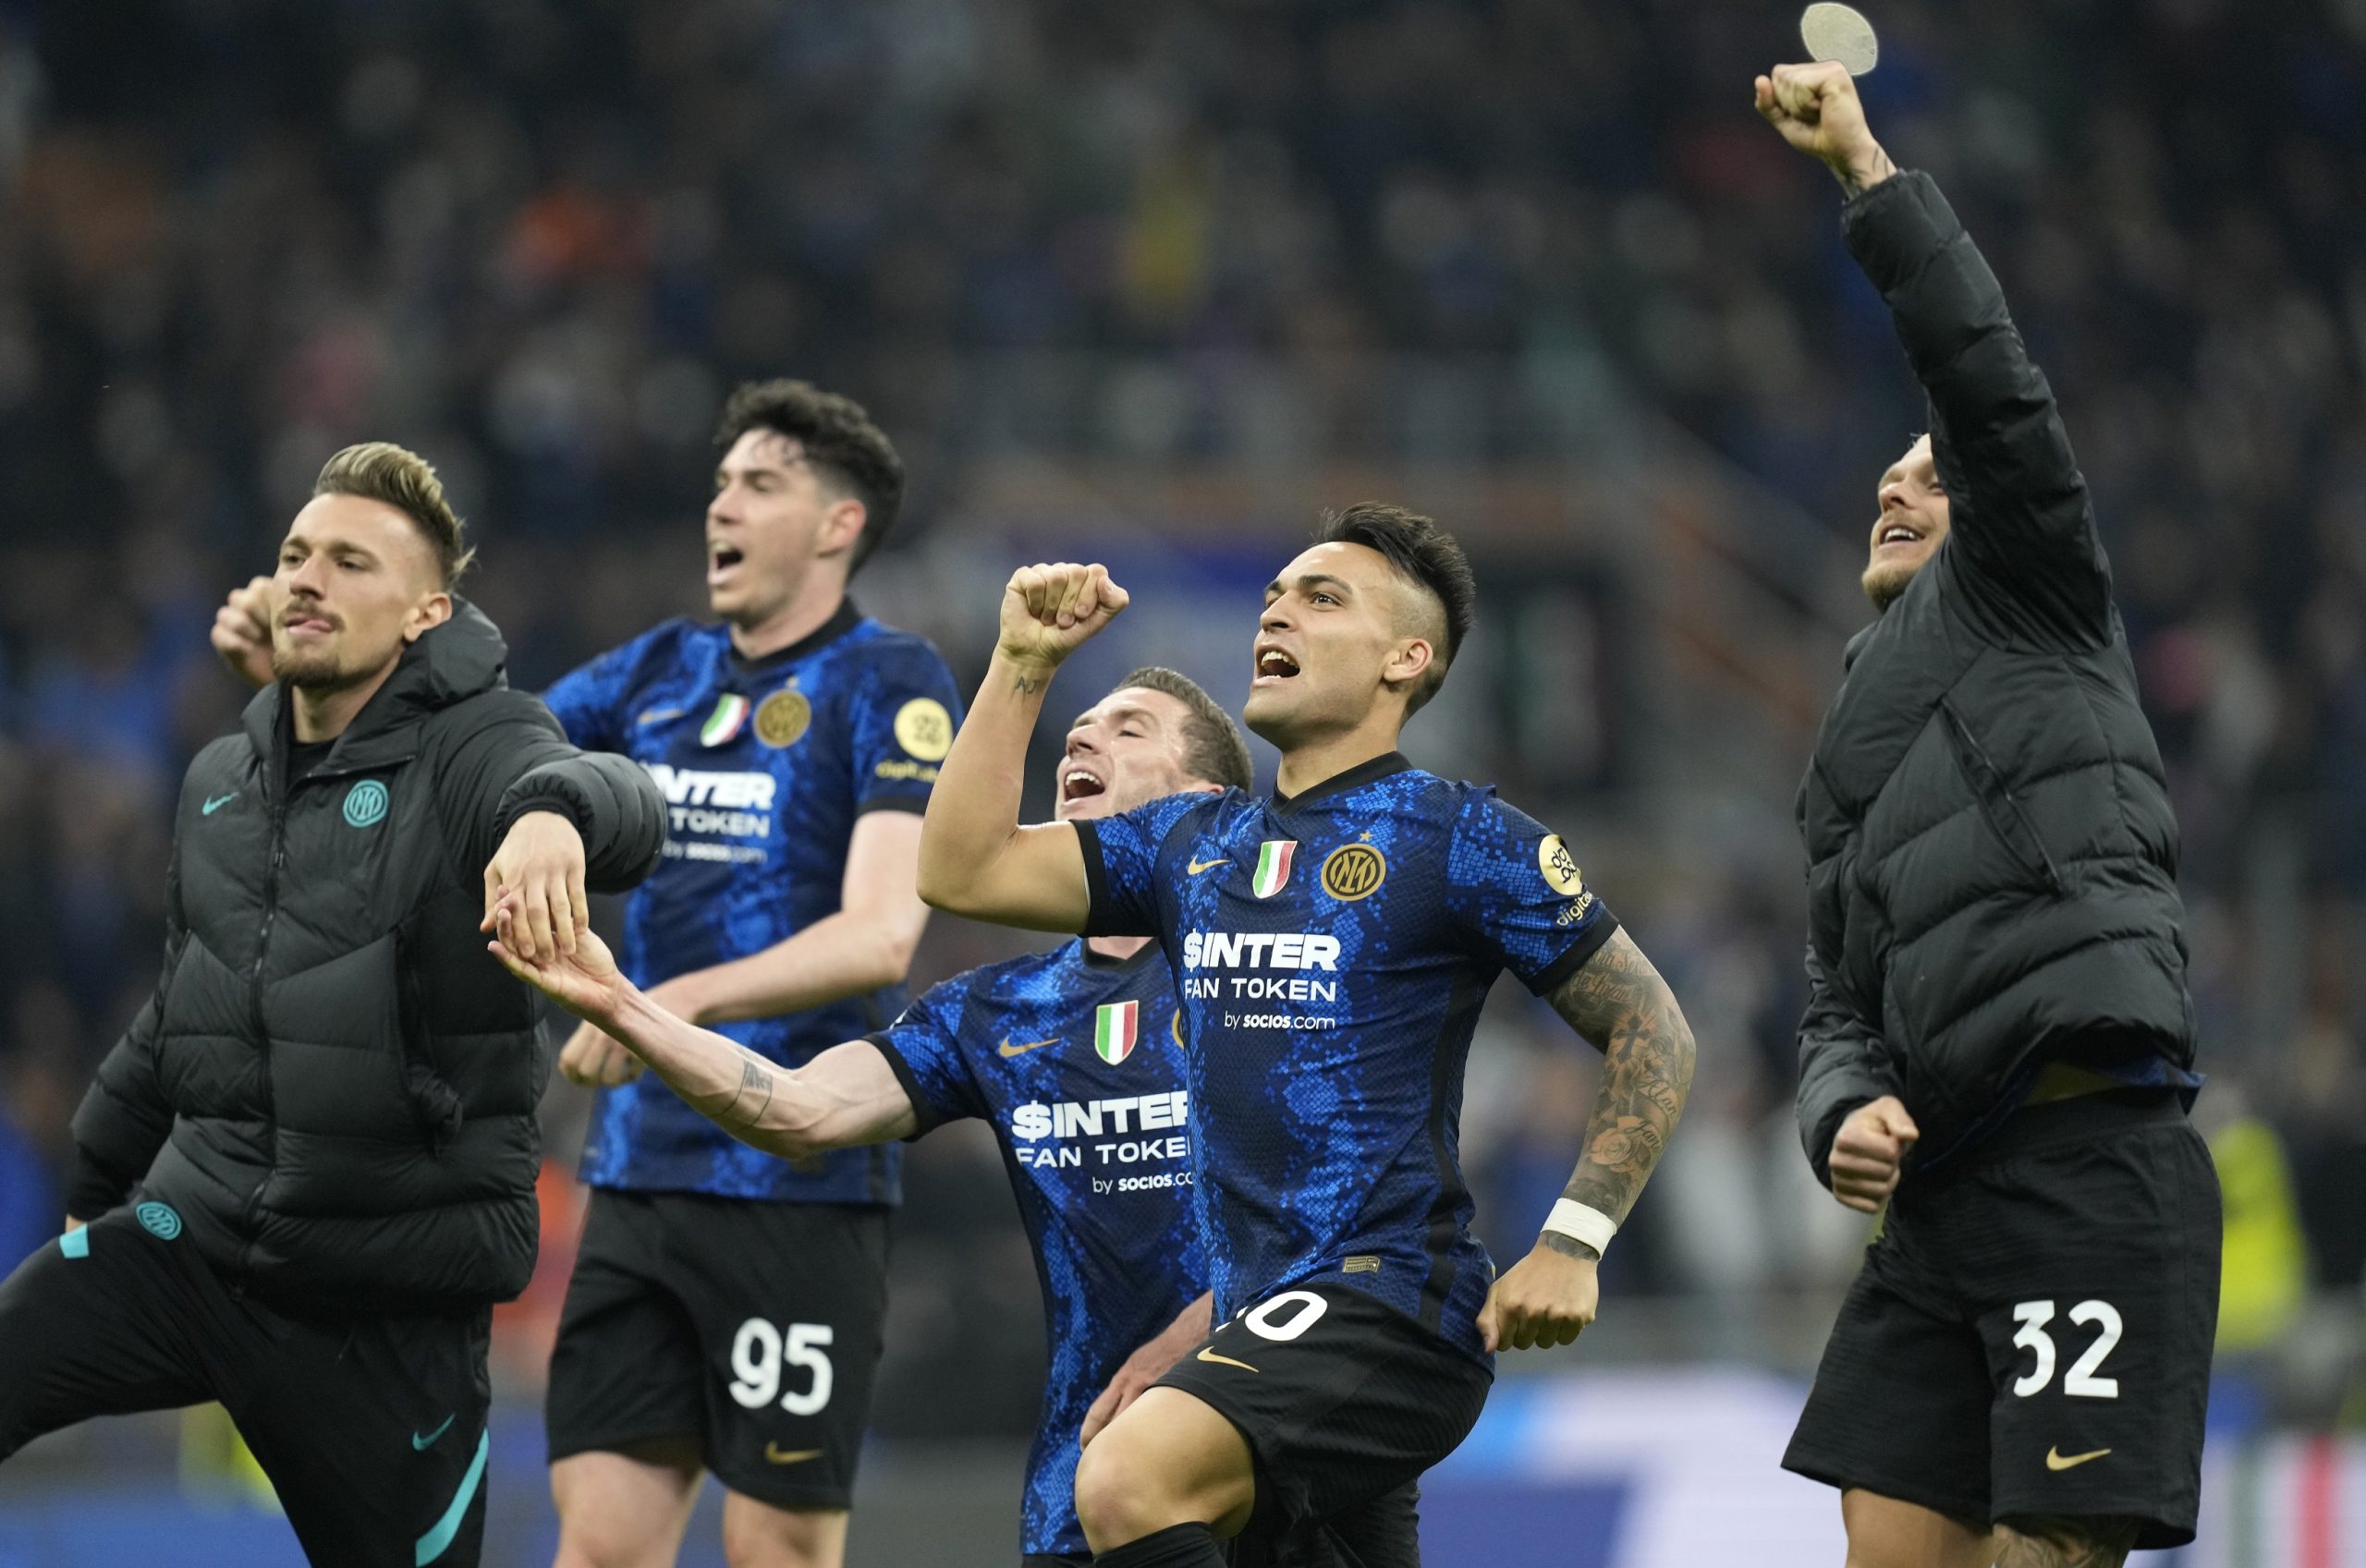 Inter advanced to the top of the Italian league with a well-deserved victory over Roma